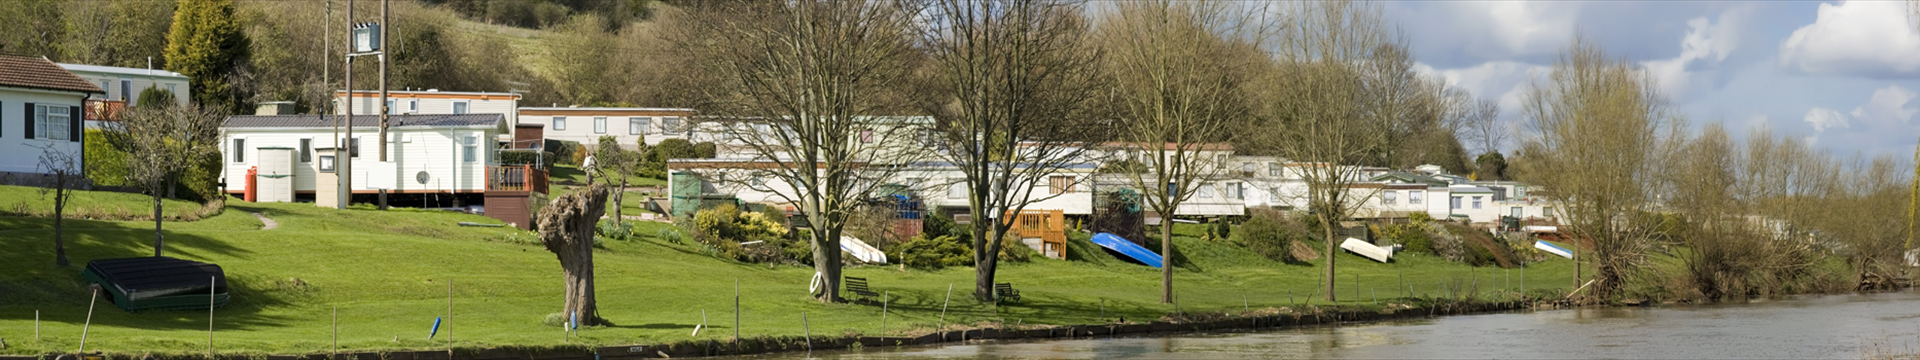 Needing to sell a Mobile Home Park?